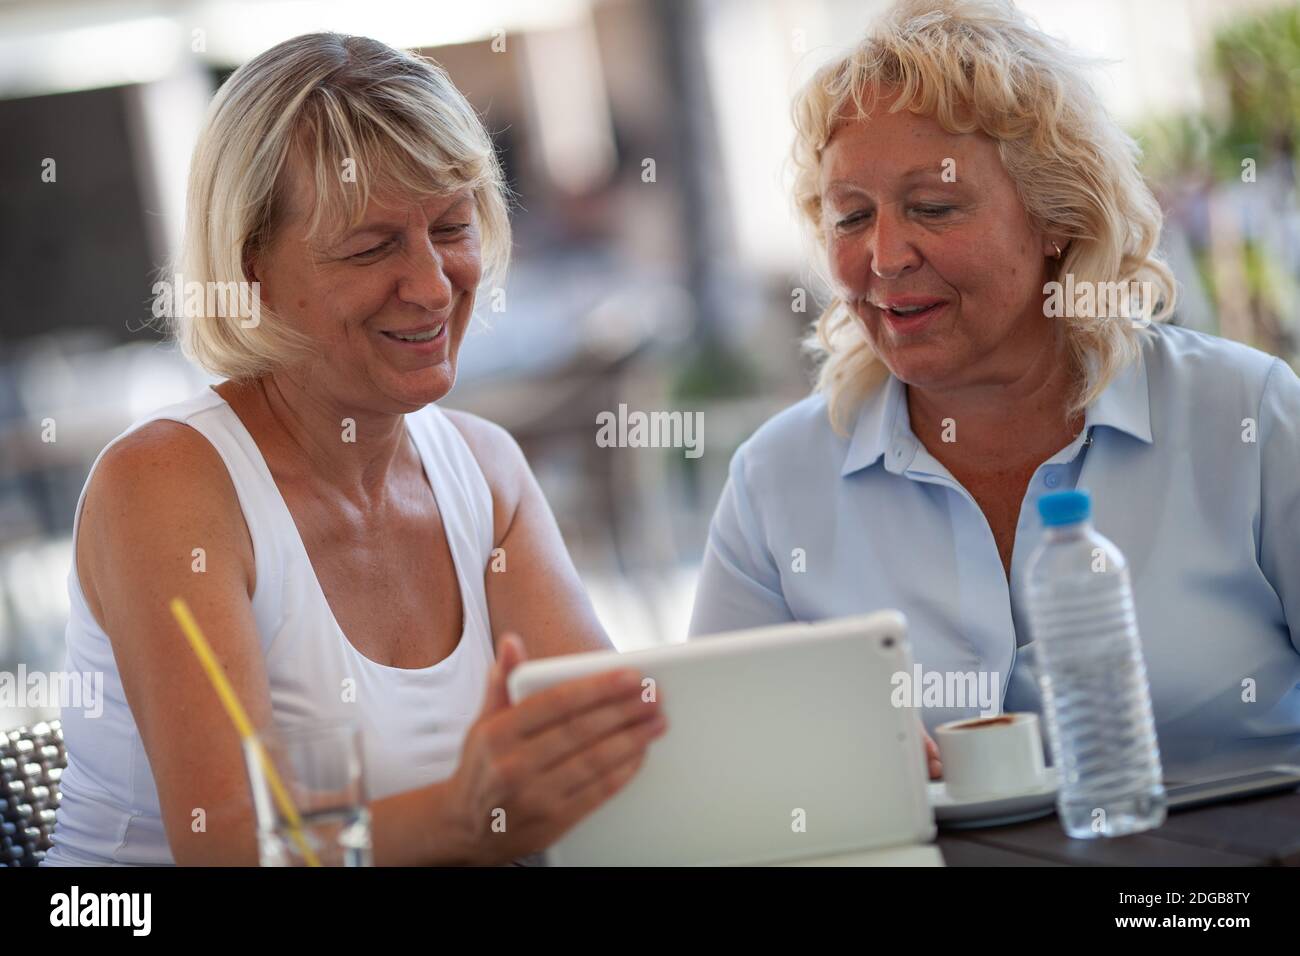 Two smiling senior women at a table of an outdoor cafe looking at the tablet screen Stock Photo